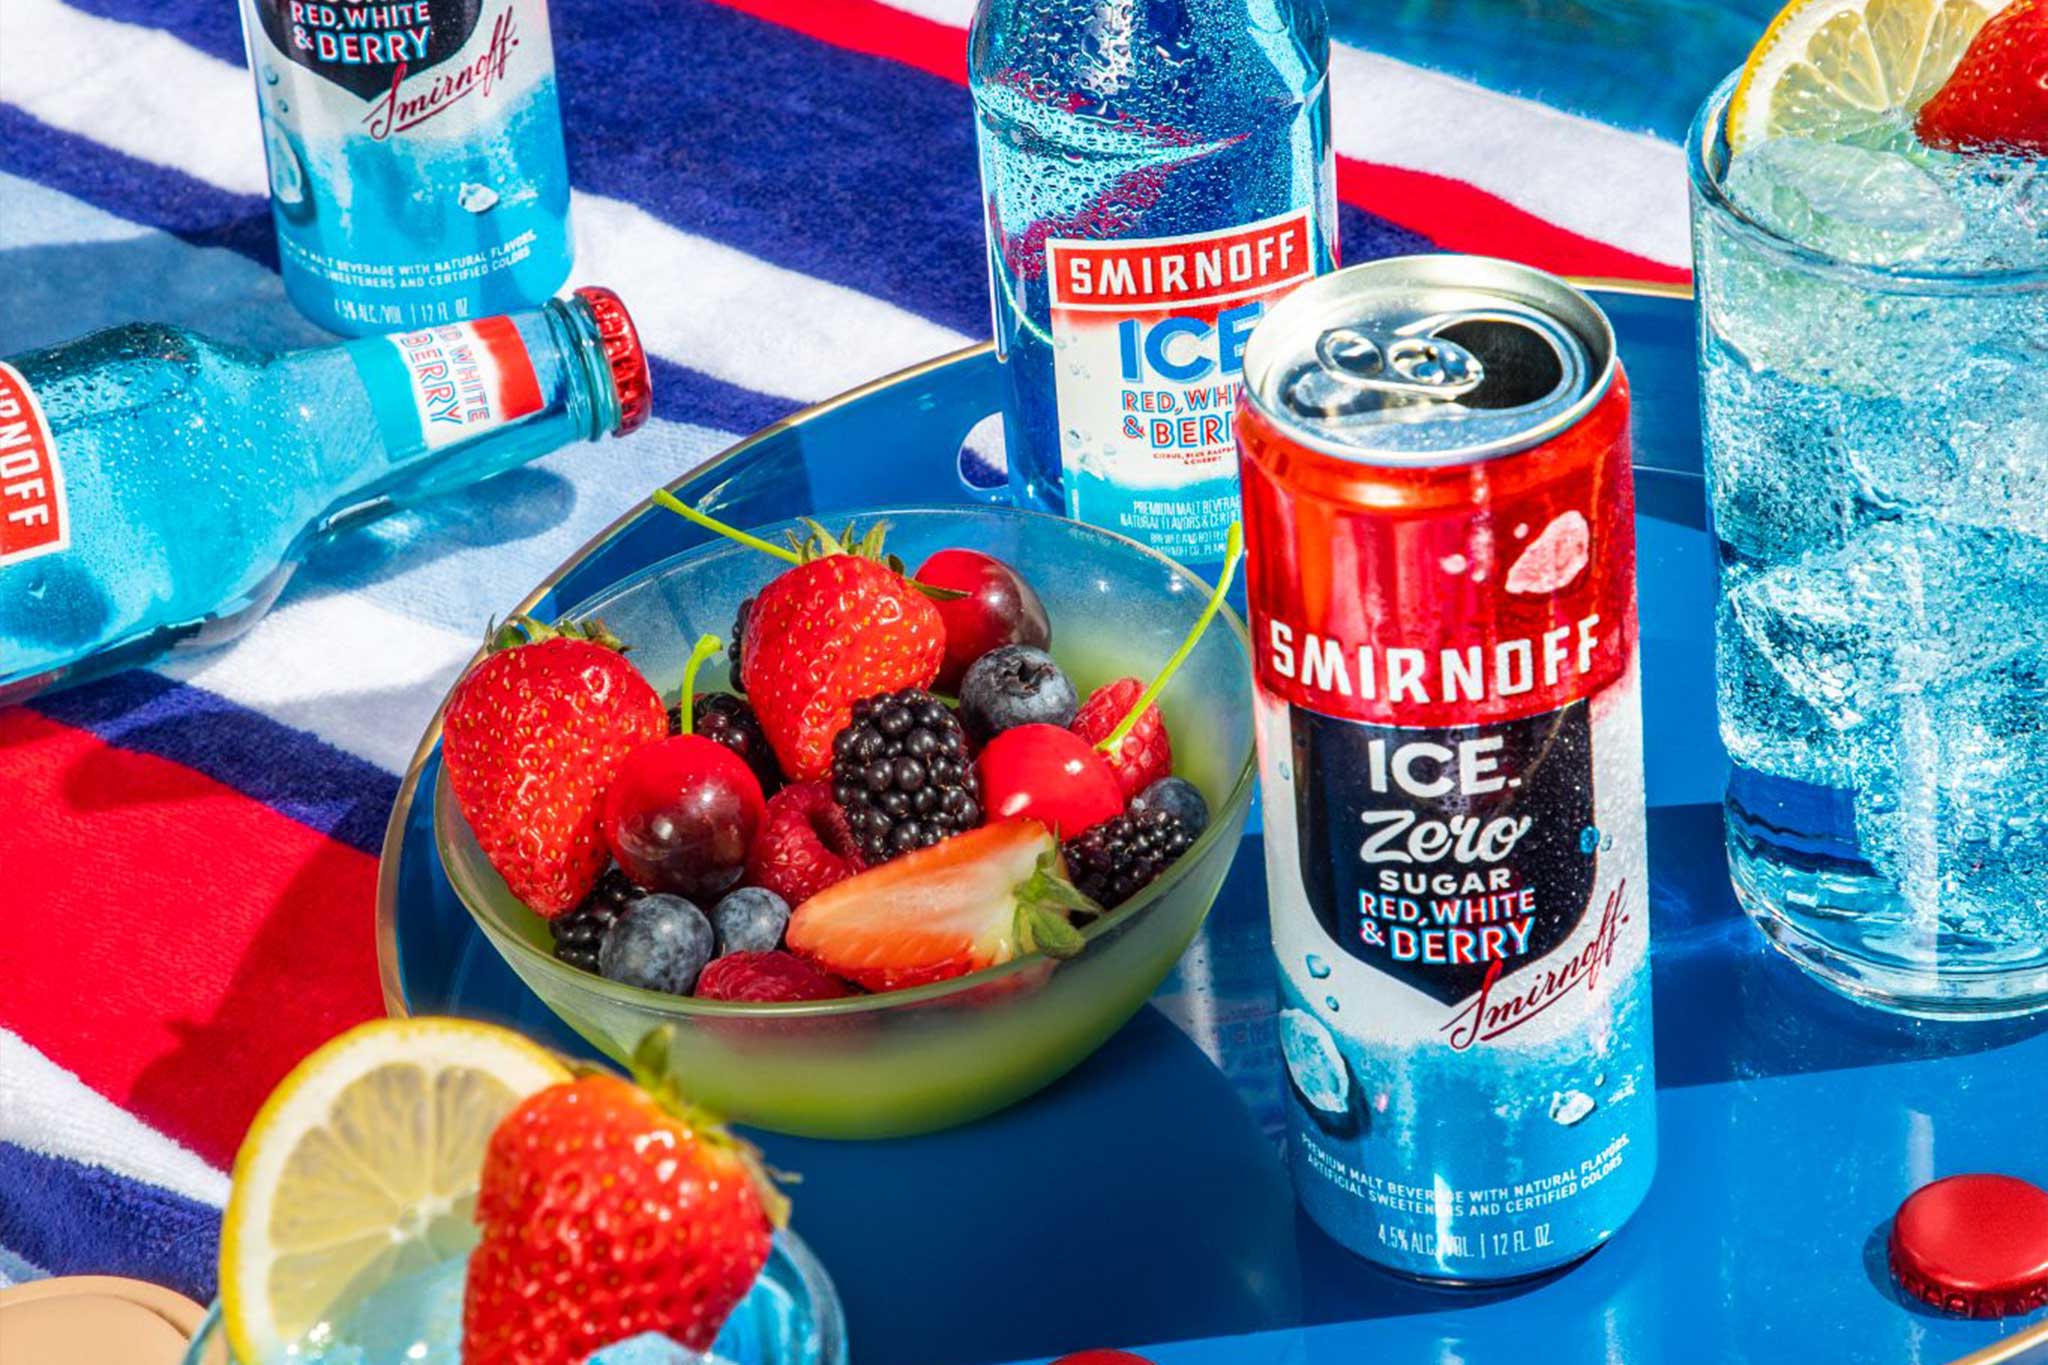 Beginning in May, the highly anticipated Smirnoff ICE Relaunch Tour will kick-off in NYC before hitting the road and cities across the country.